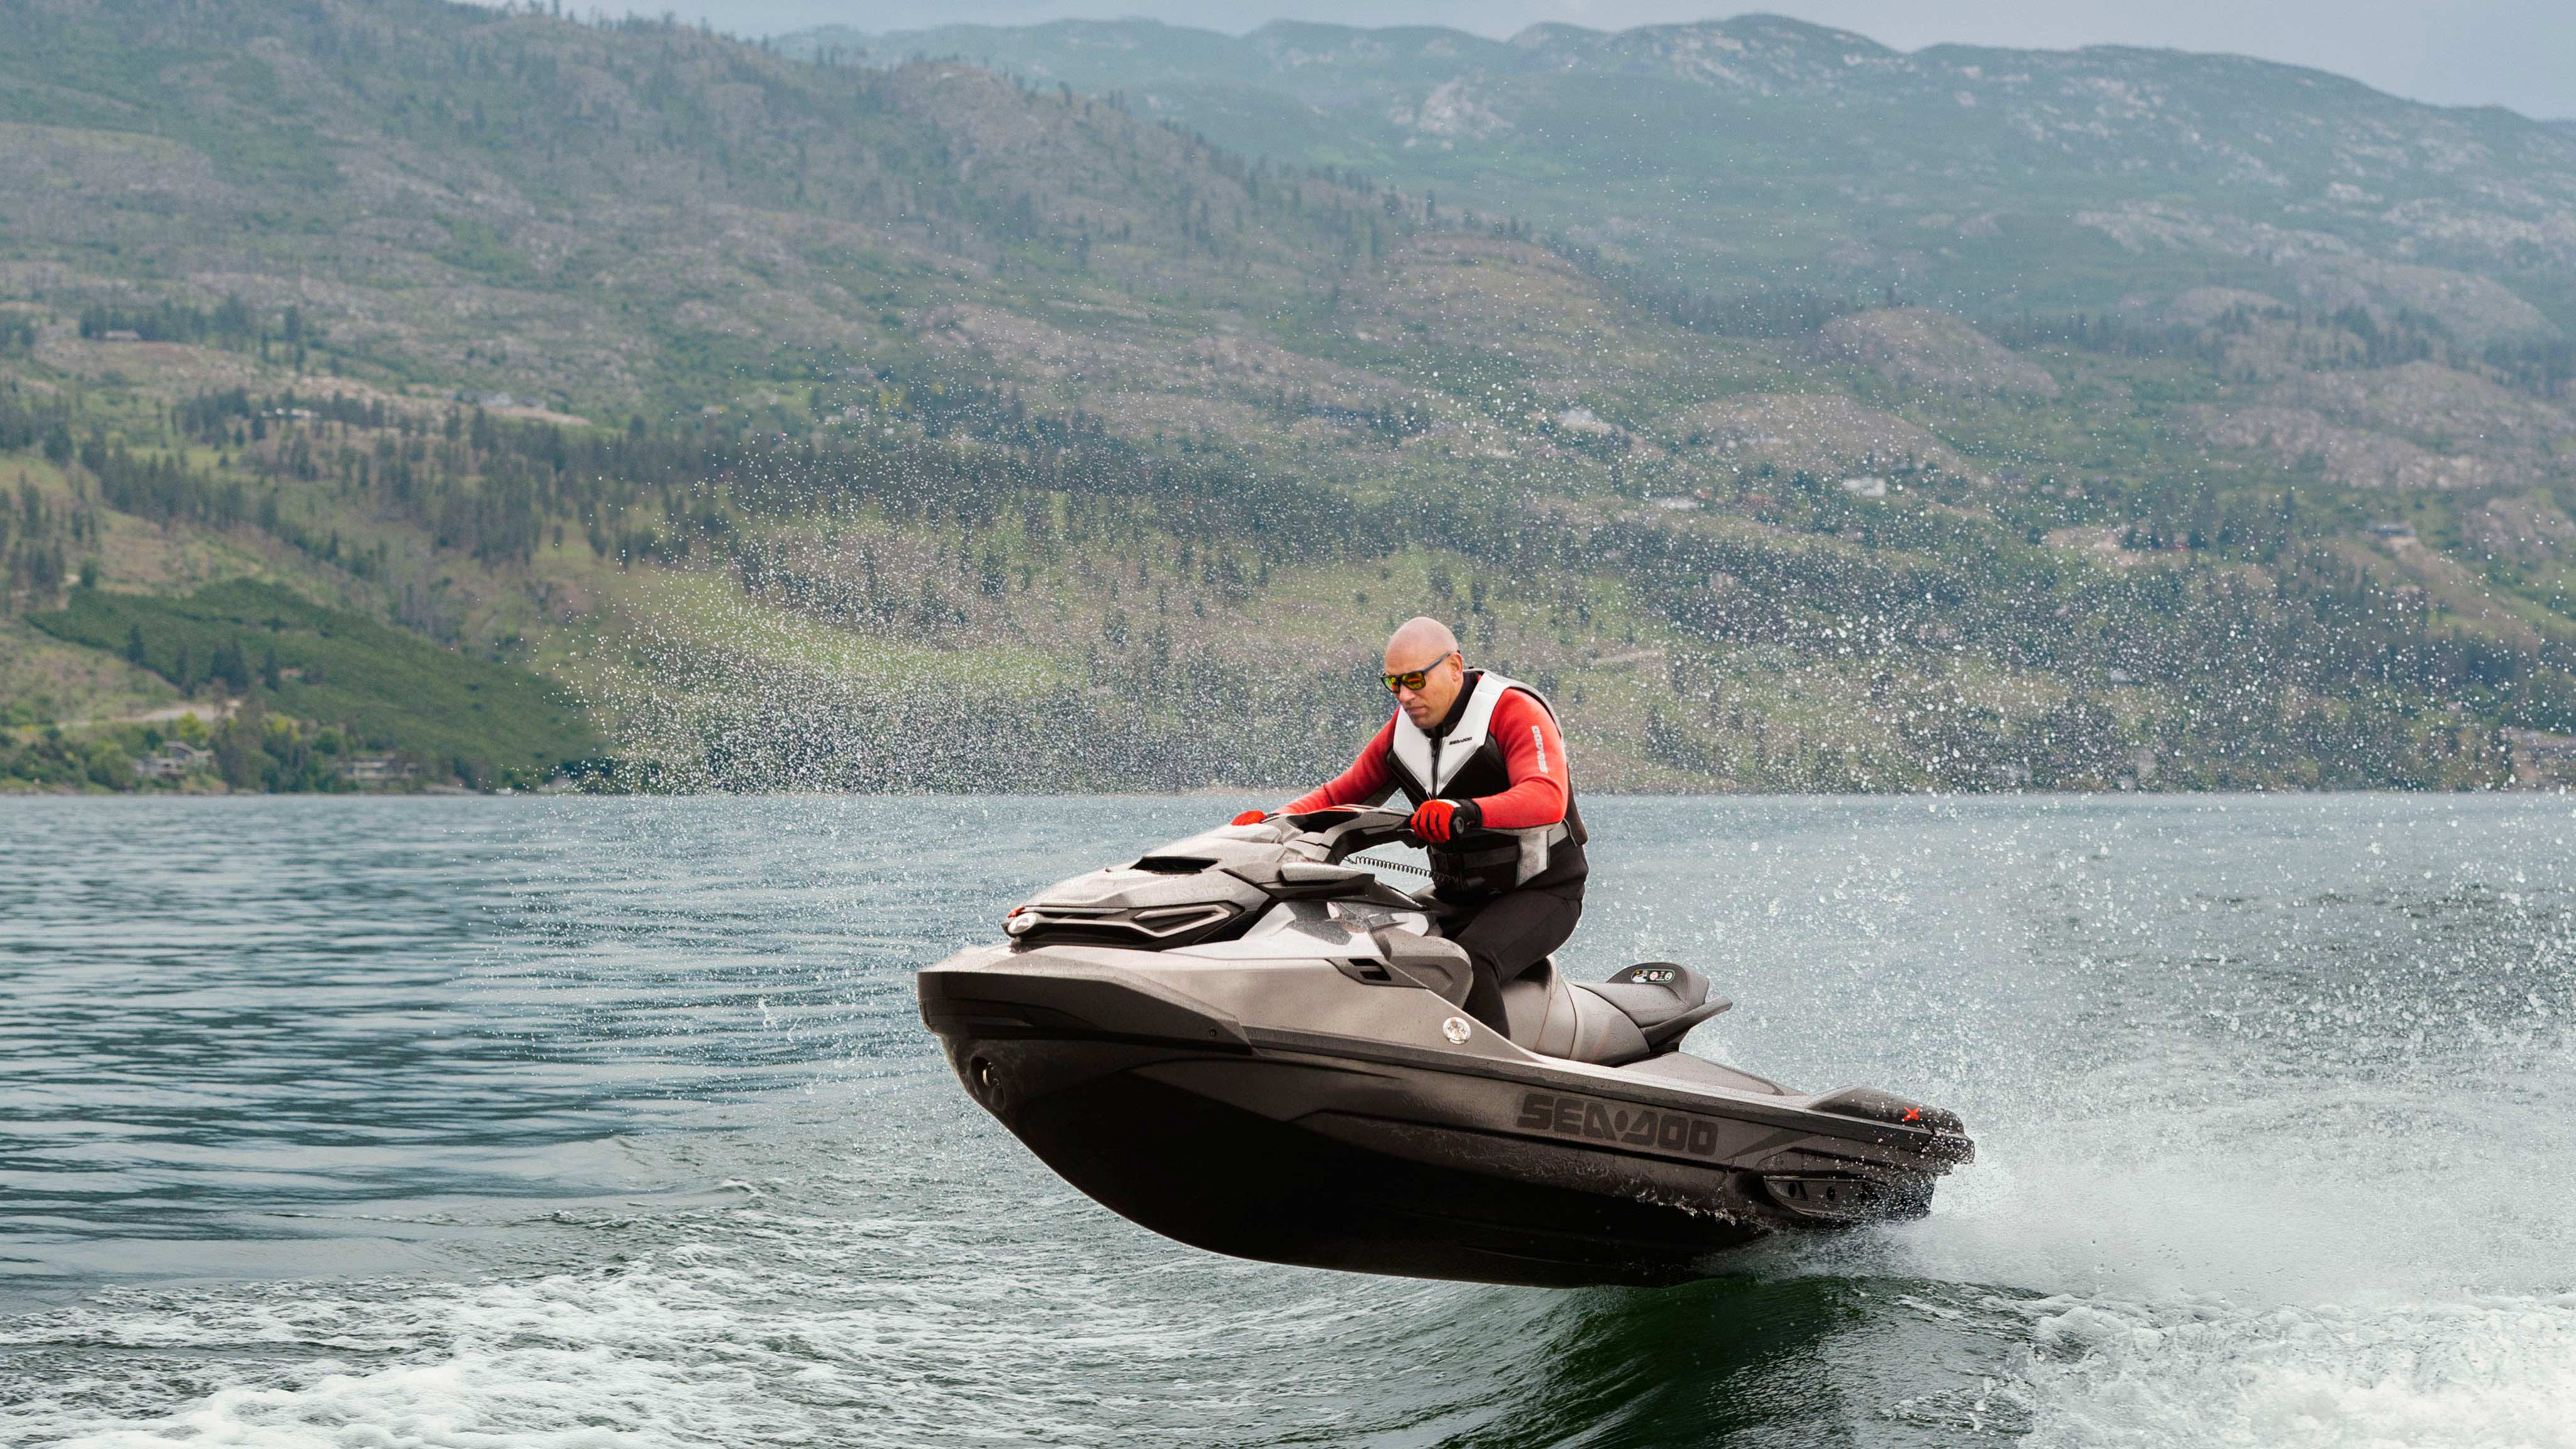 Man jumping a wave with the Sea-Doo RXT-X